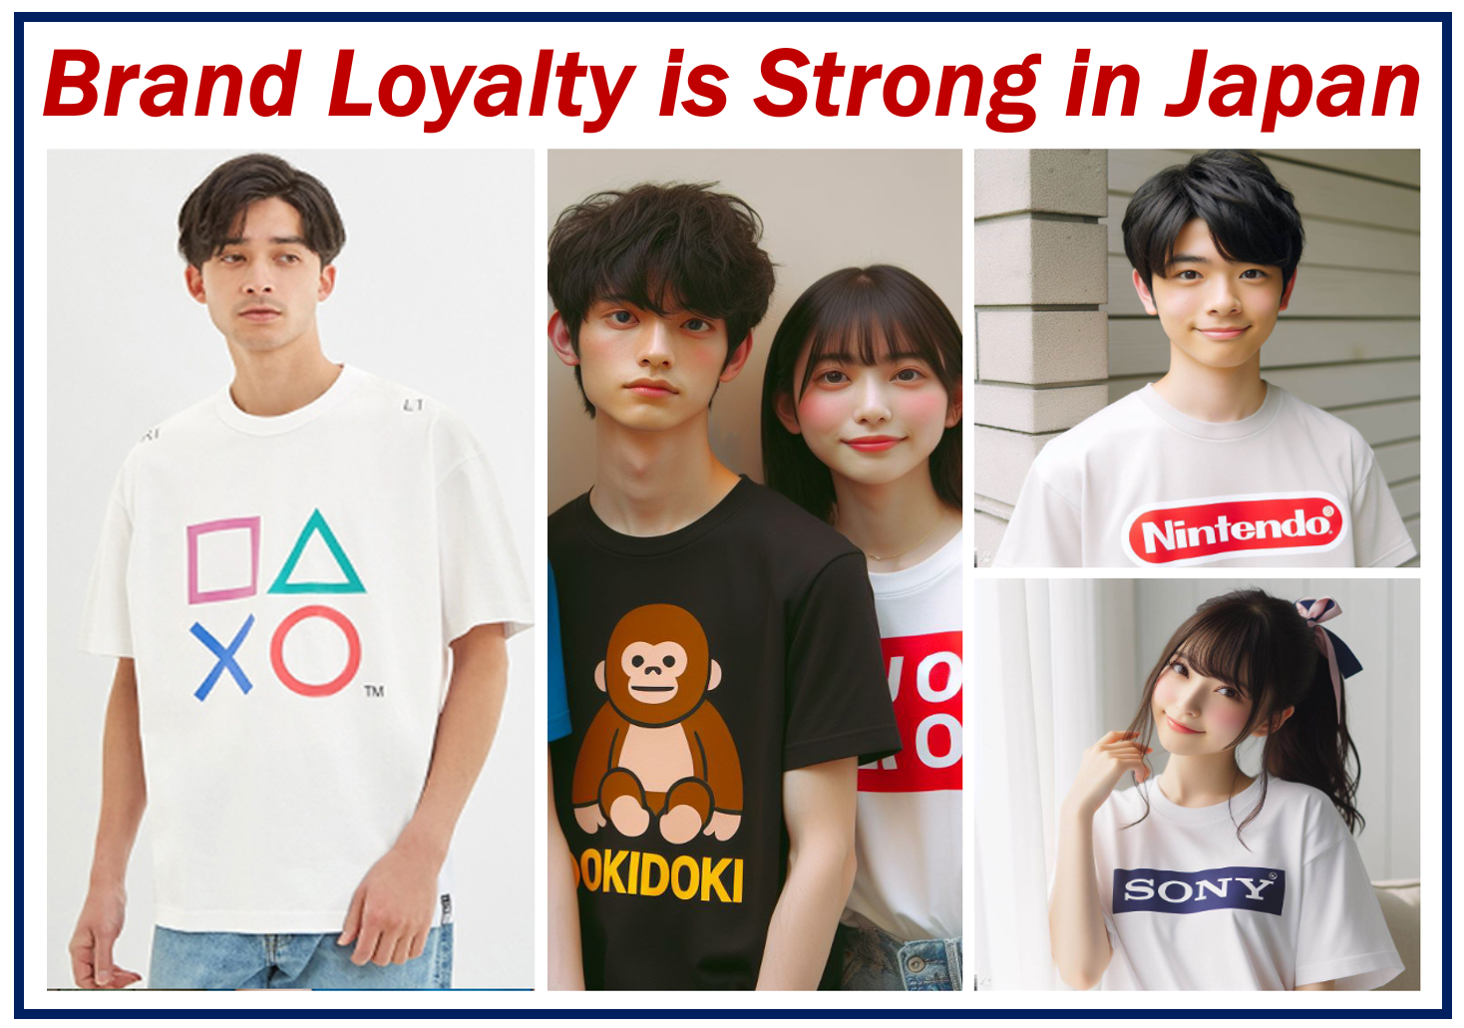 5 Japanese teens wearing T-shirts with logos - depicting brand loyalty.